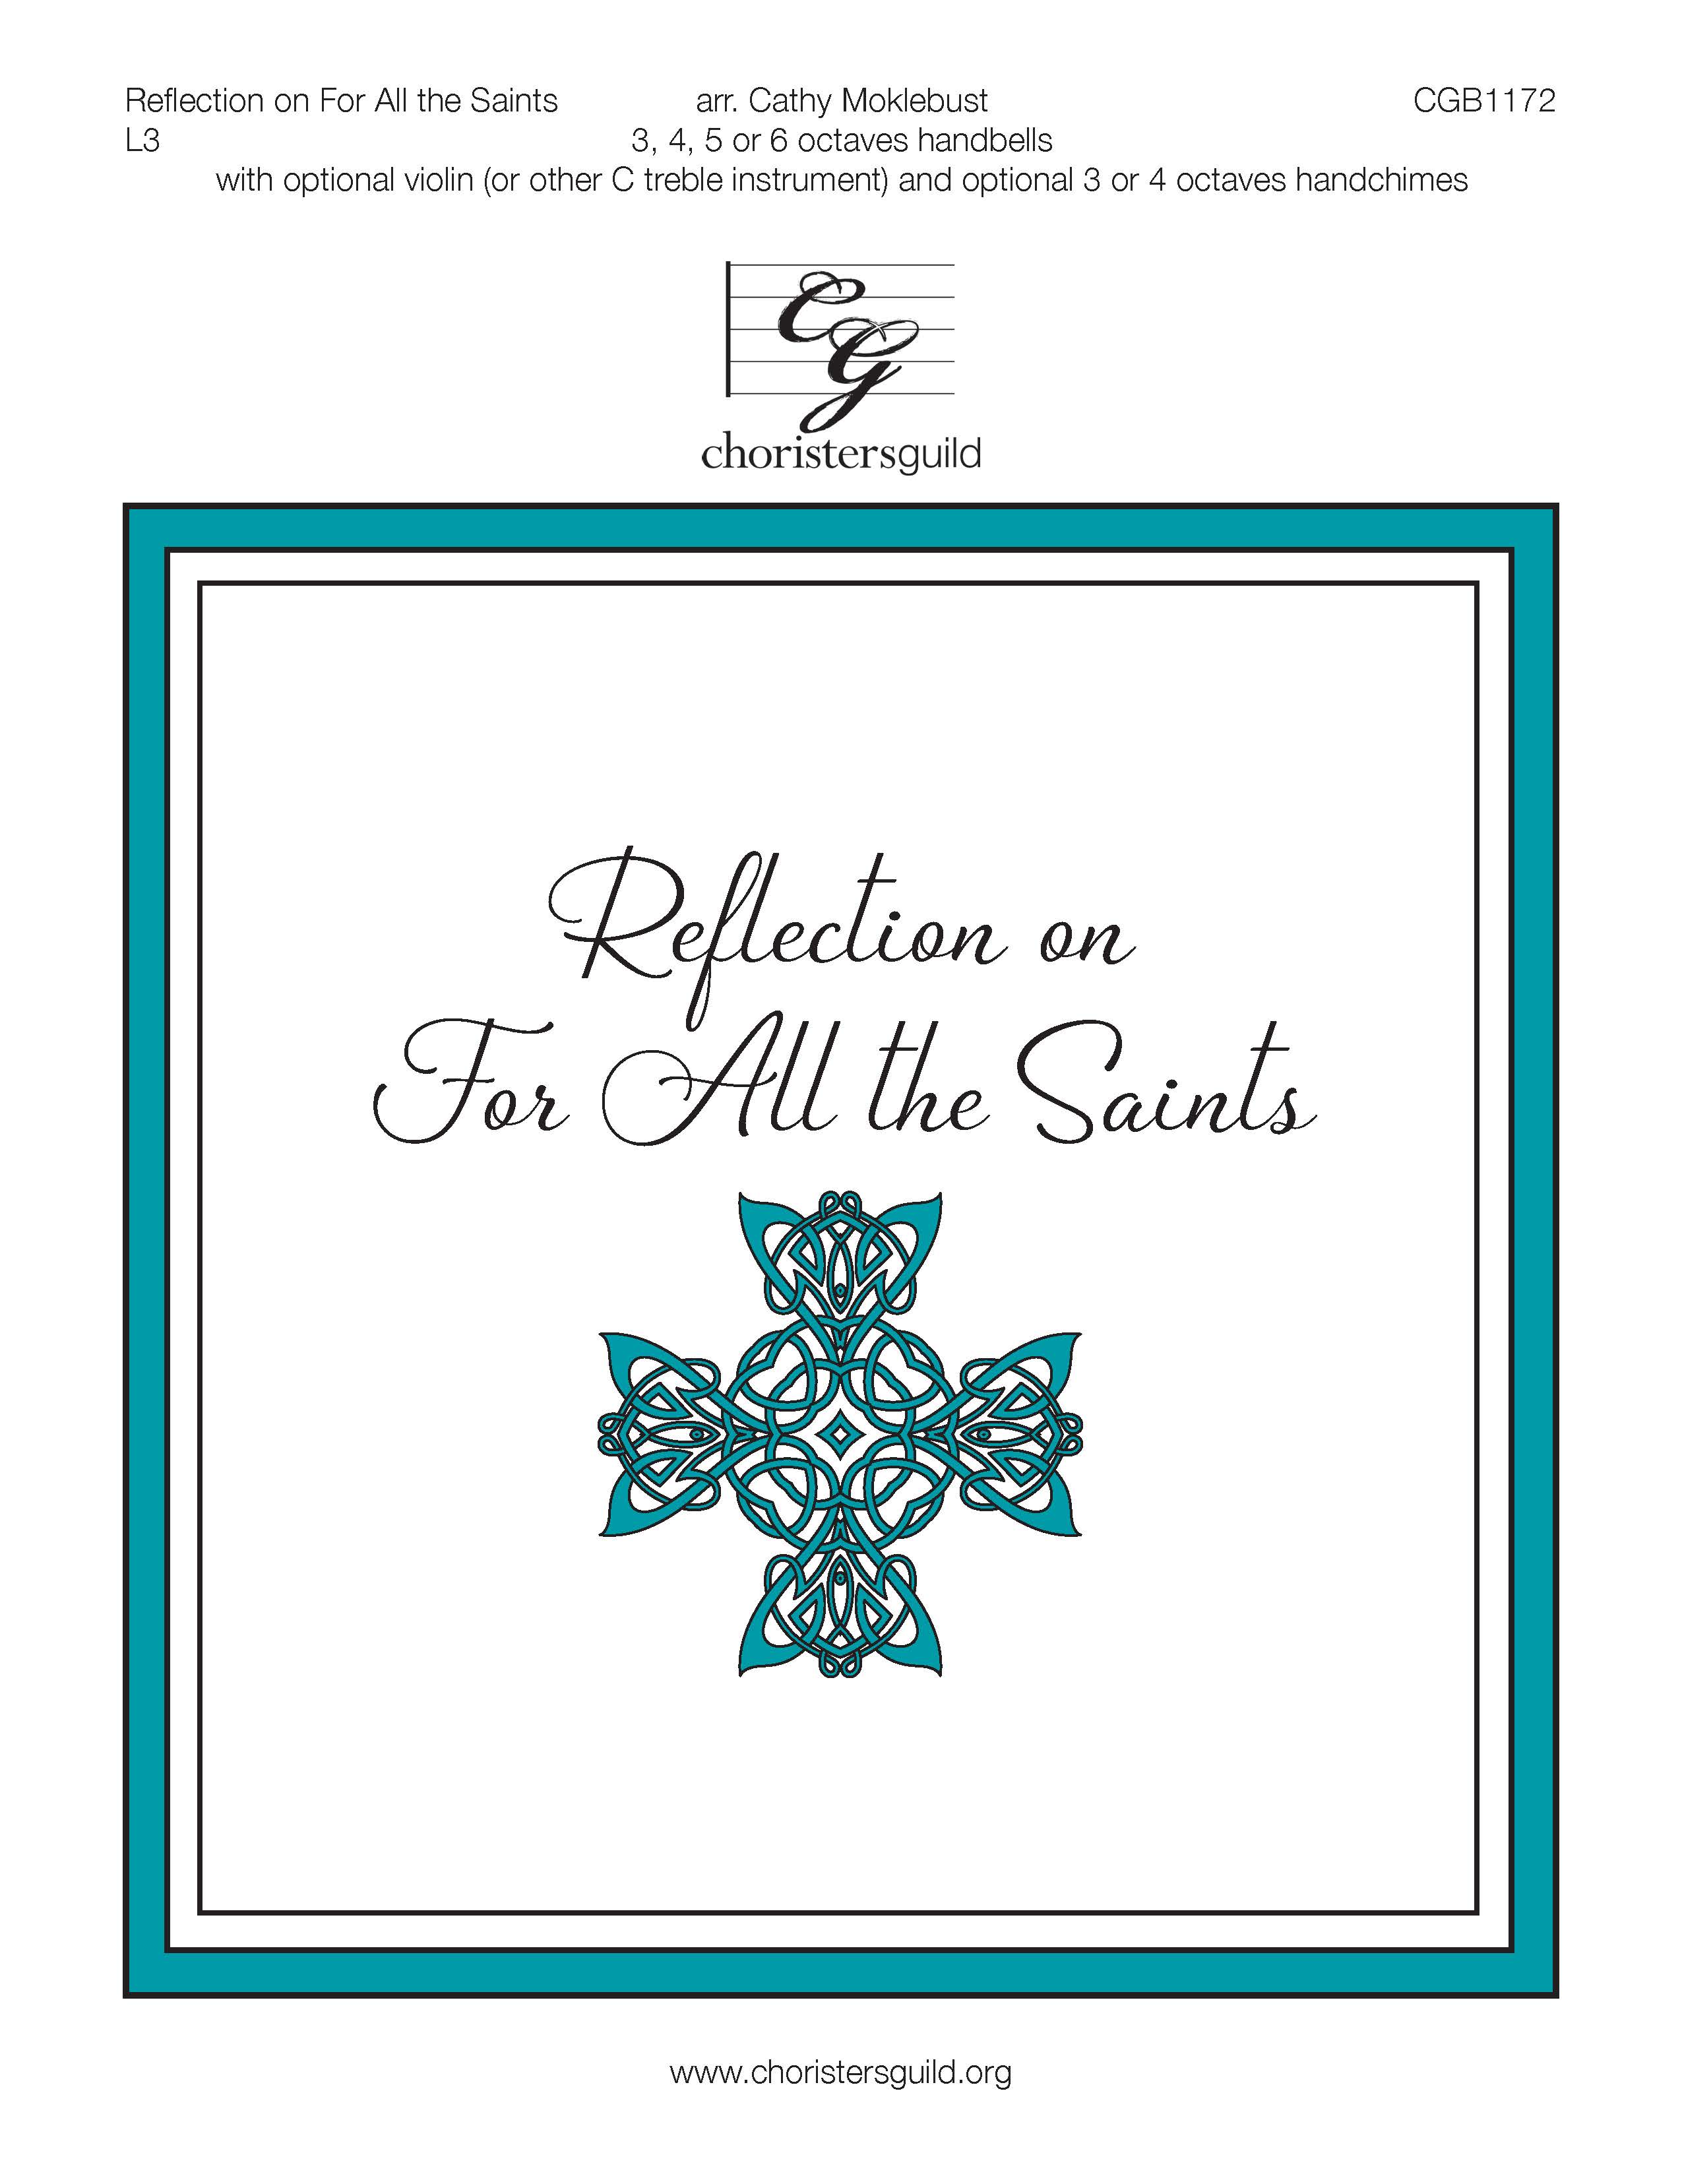 CGB1172 Reflection on For All the Saints